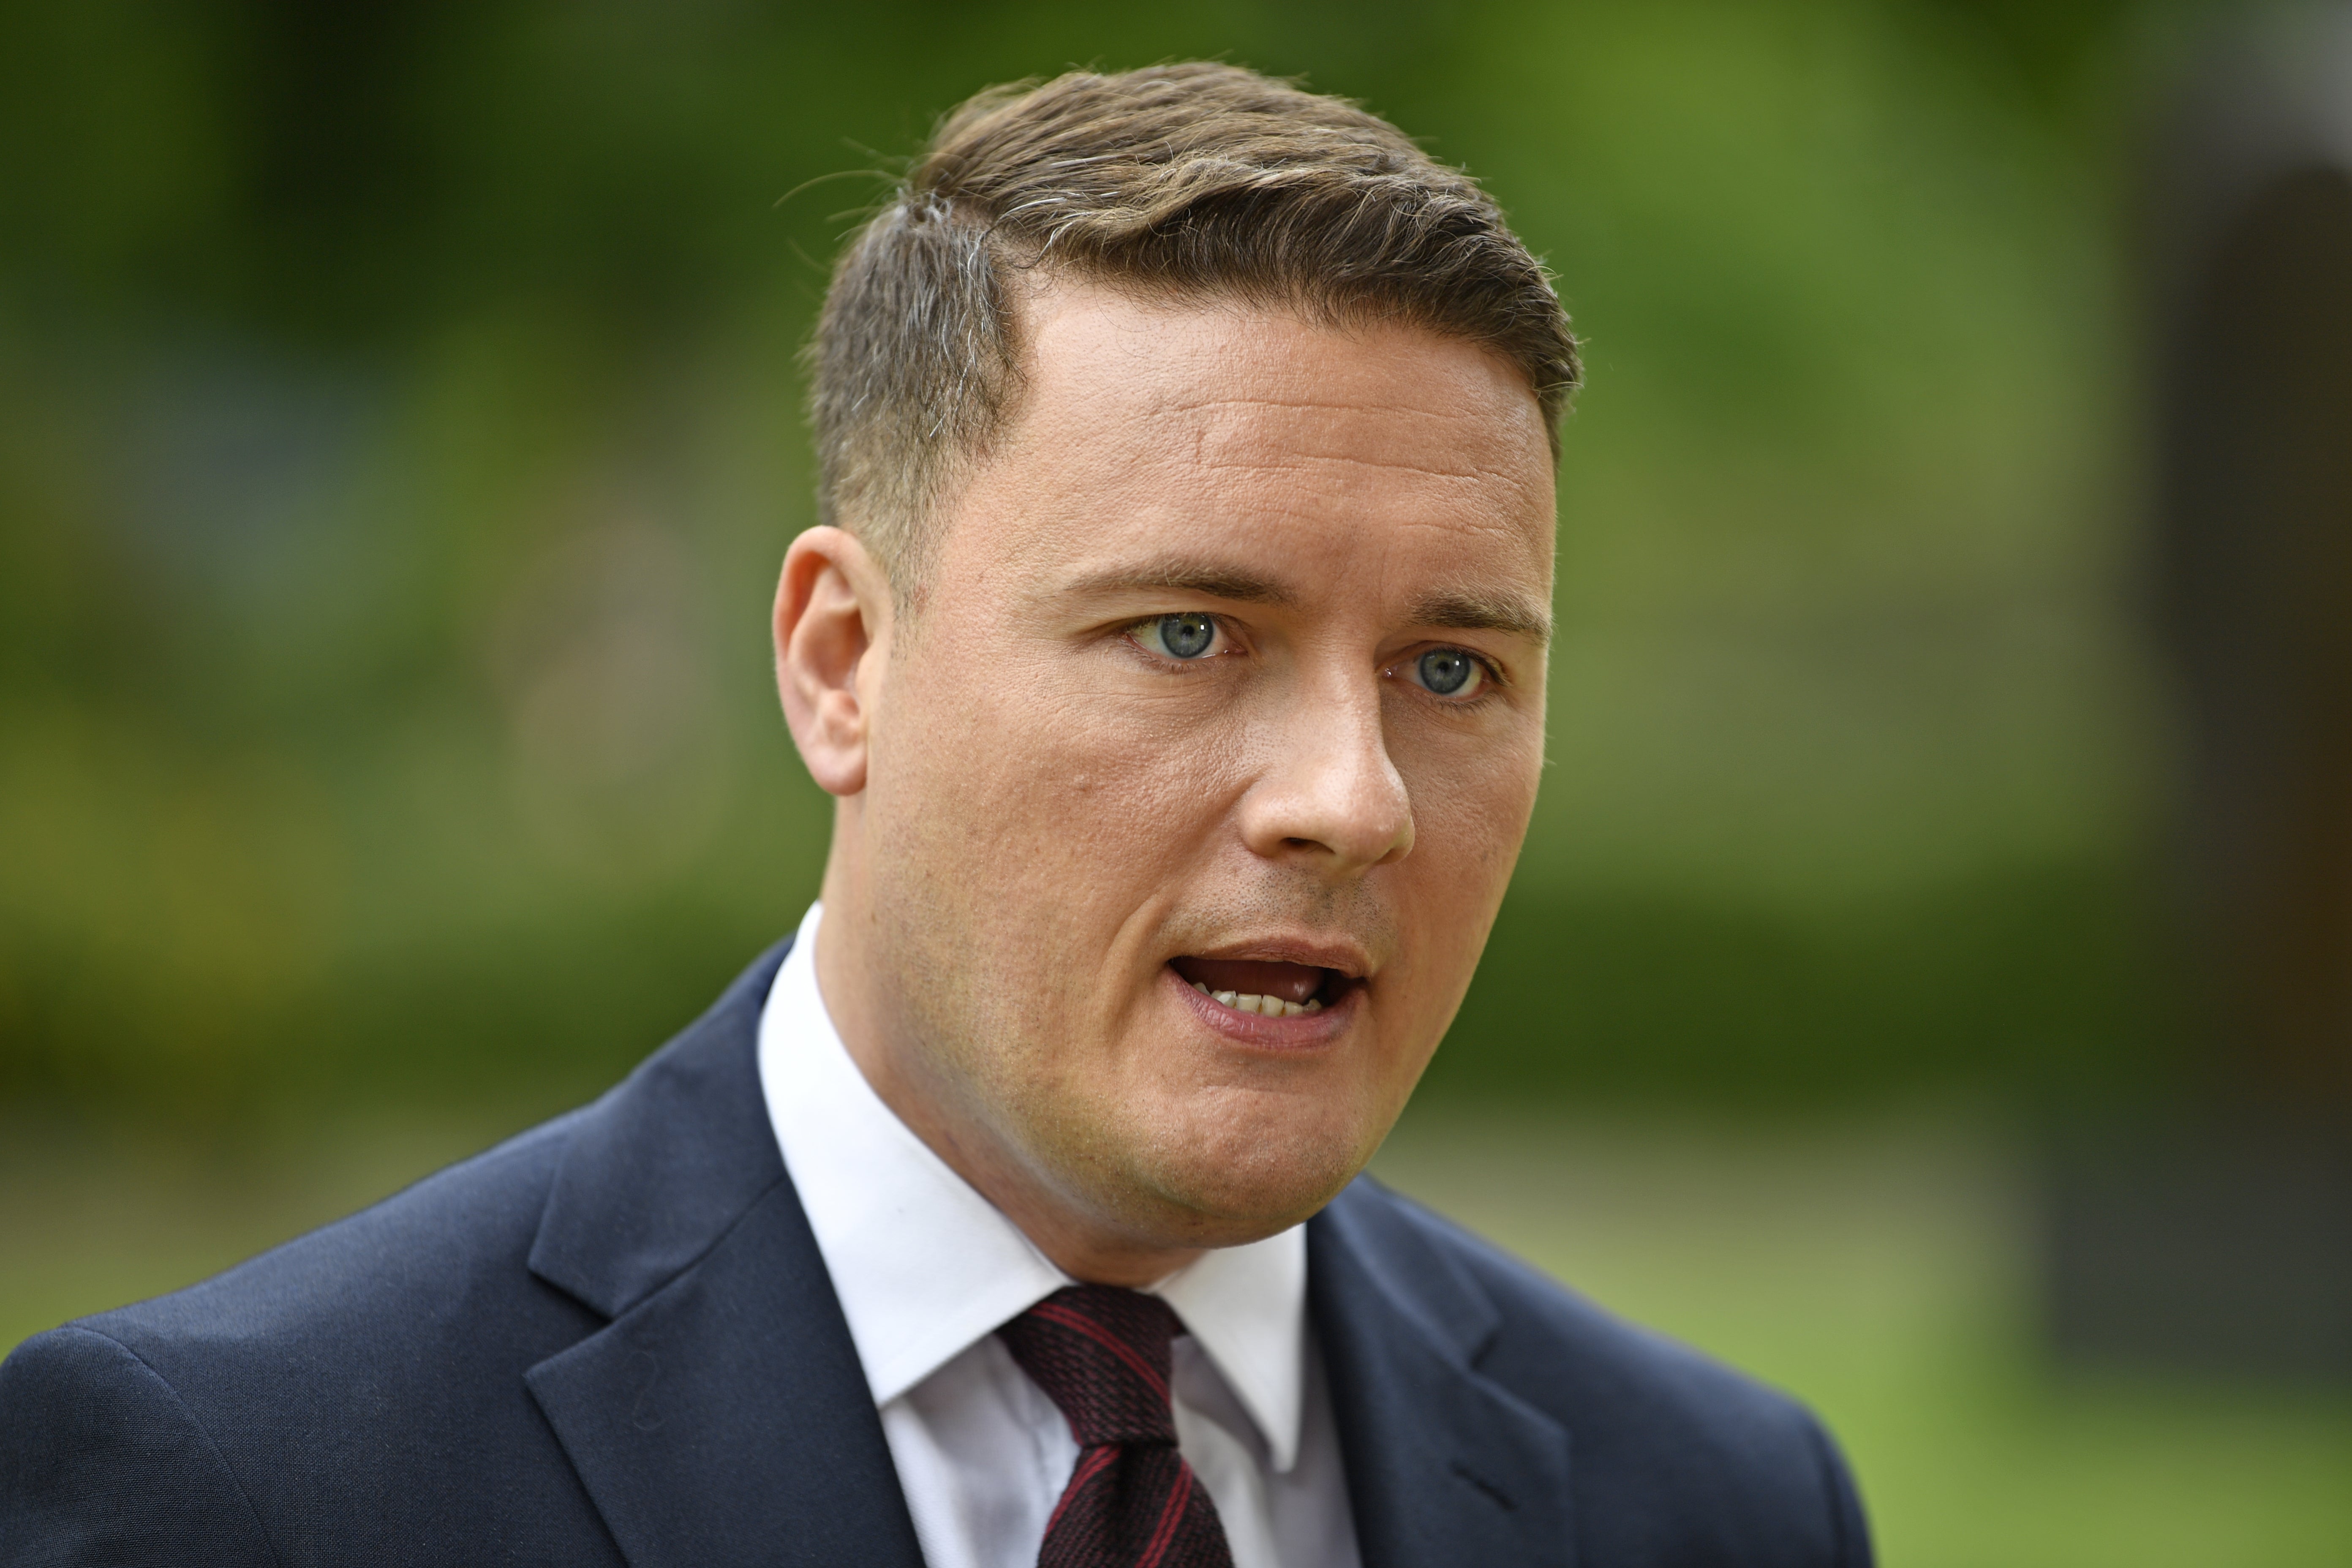 Shadow health secretary Wes Streeting said it is ‘morally unacceptable’ that the country has a ‘two-tier’ system (Beresford Hodge/PA)